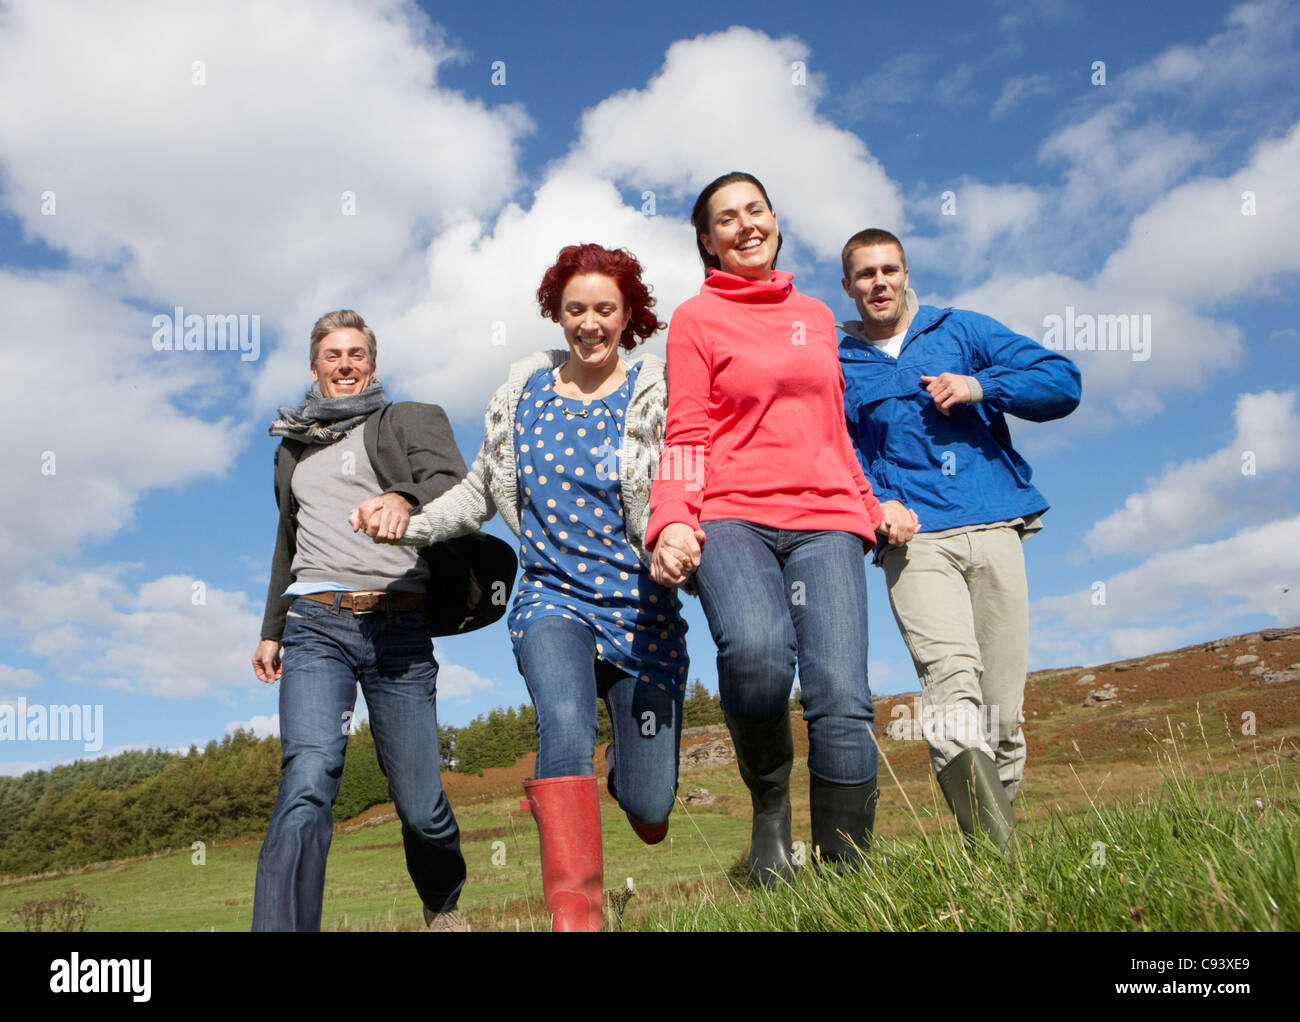 Adult group in countryside Stock Photo